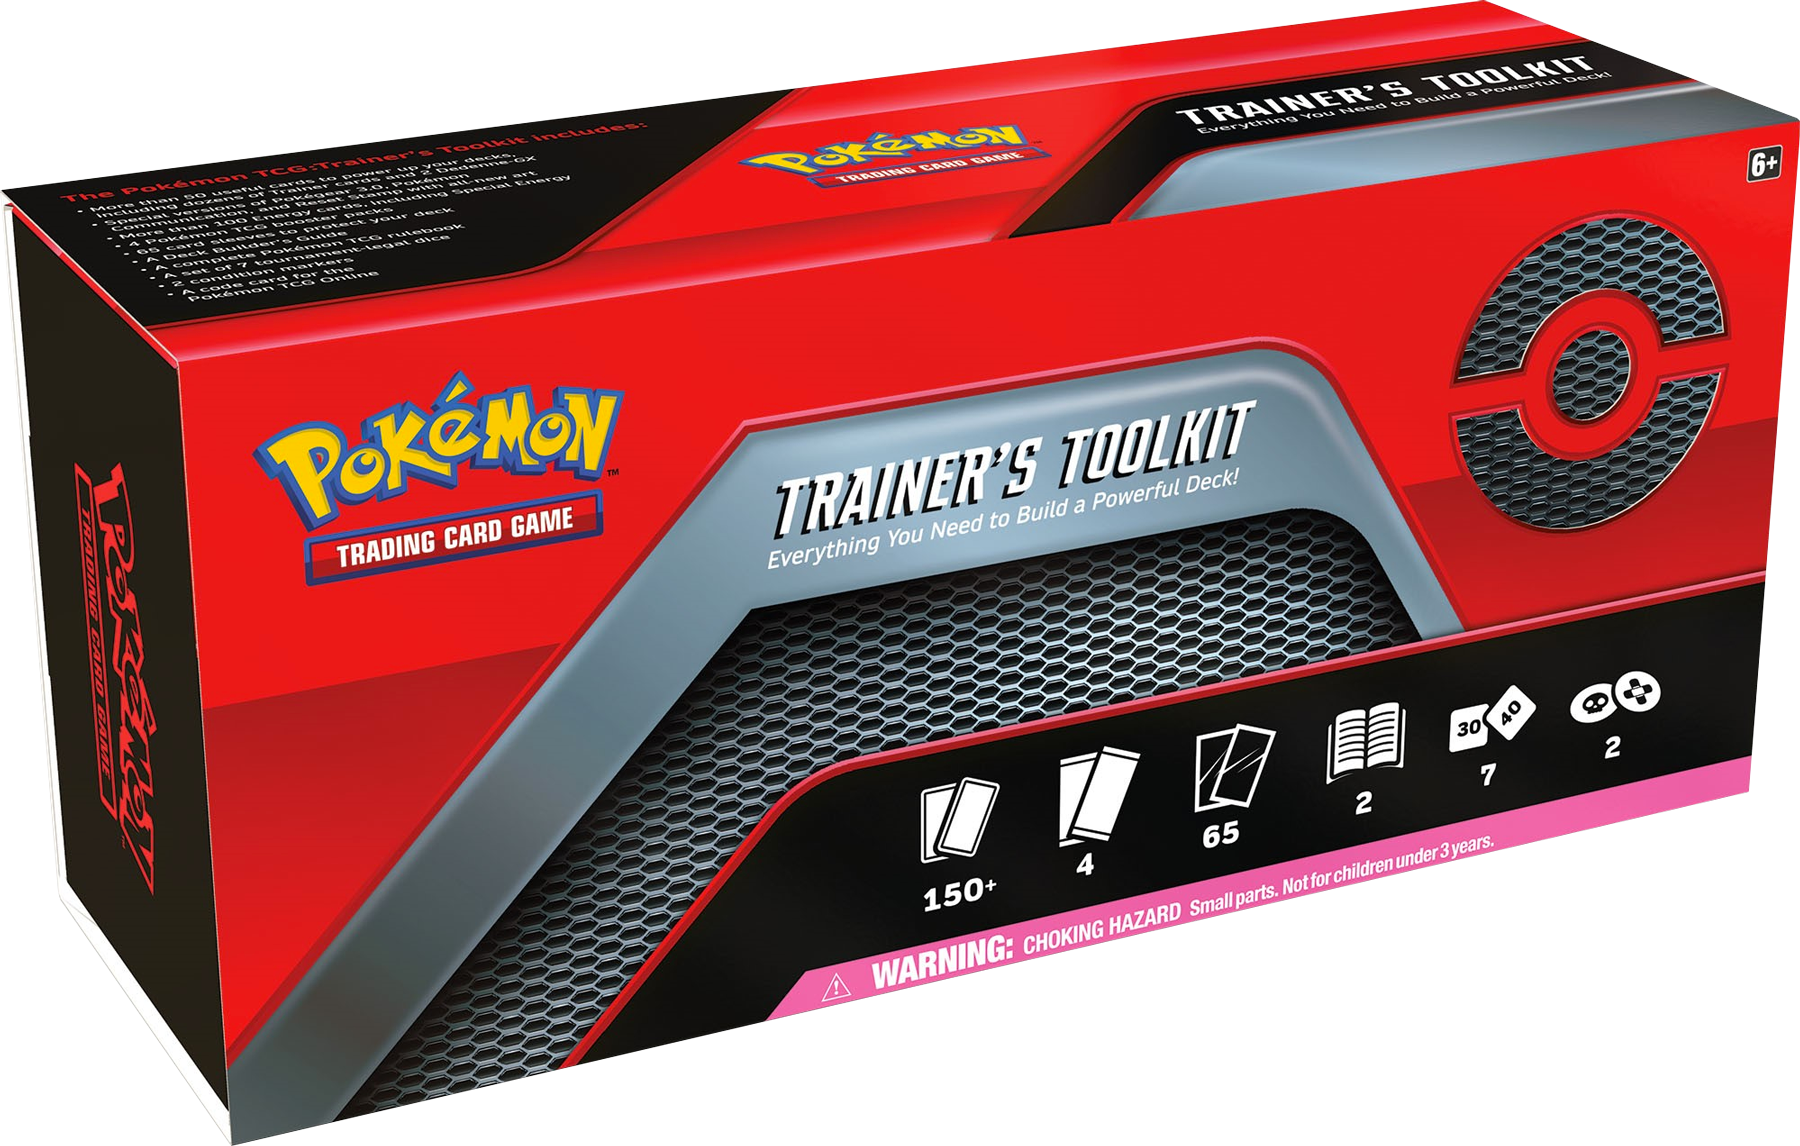 trainers toolkit contents